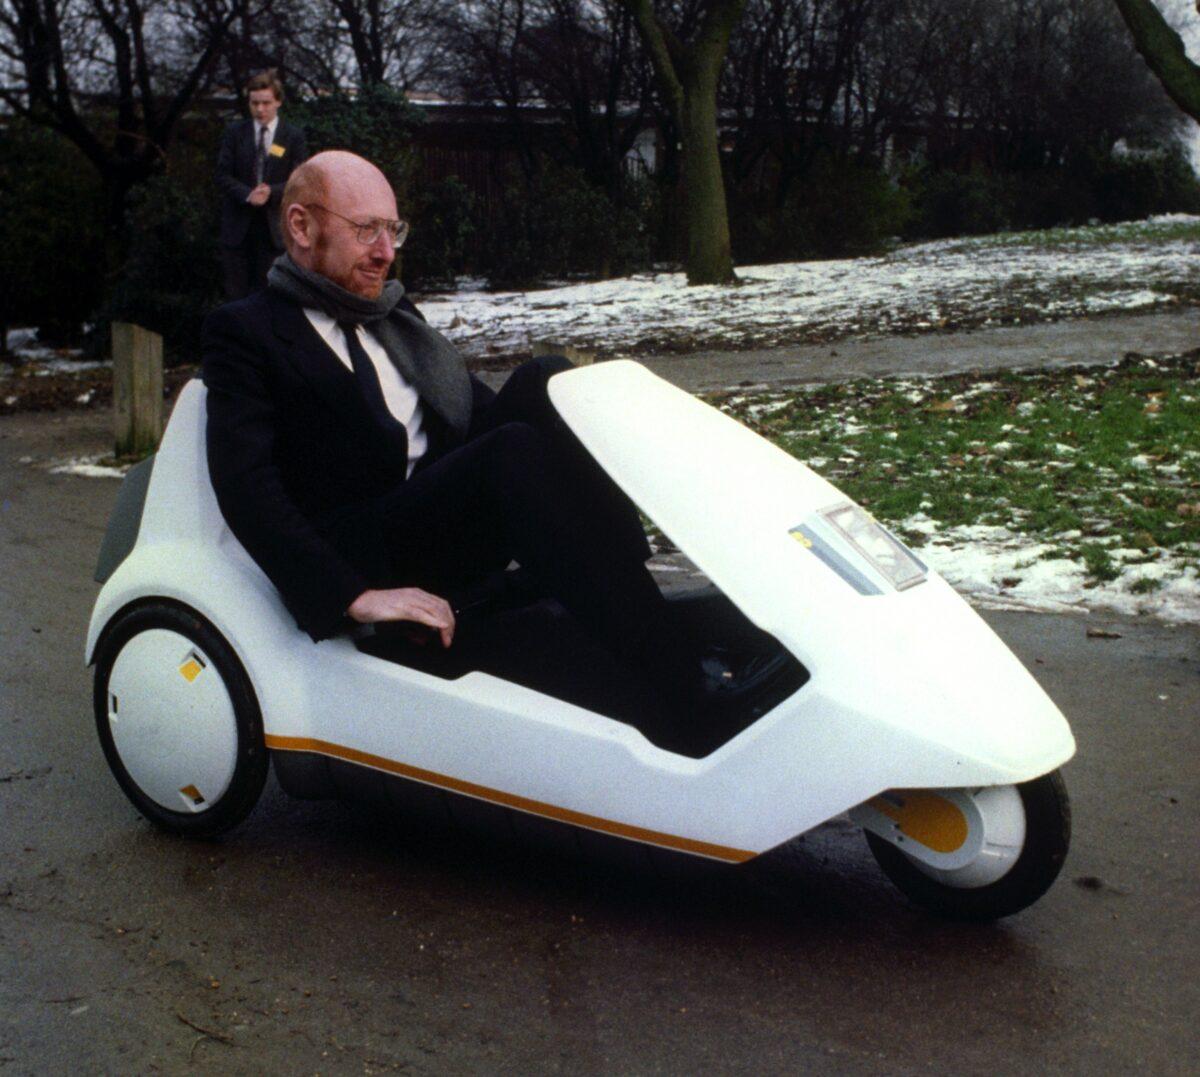 Sir Clive Sinclair demonstrating his C5 electric vehicle, the battery-come-pedal powered trike, at Alexandra Palace, in a file photo on Jan. 10, 1985. (PA Images